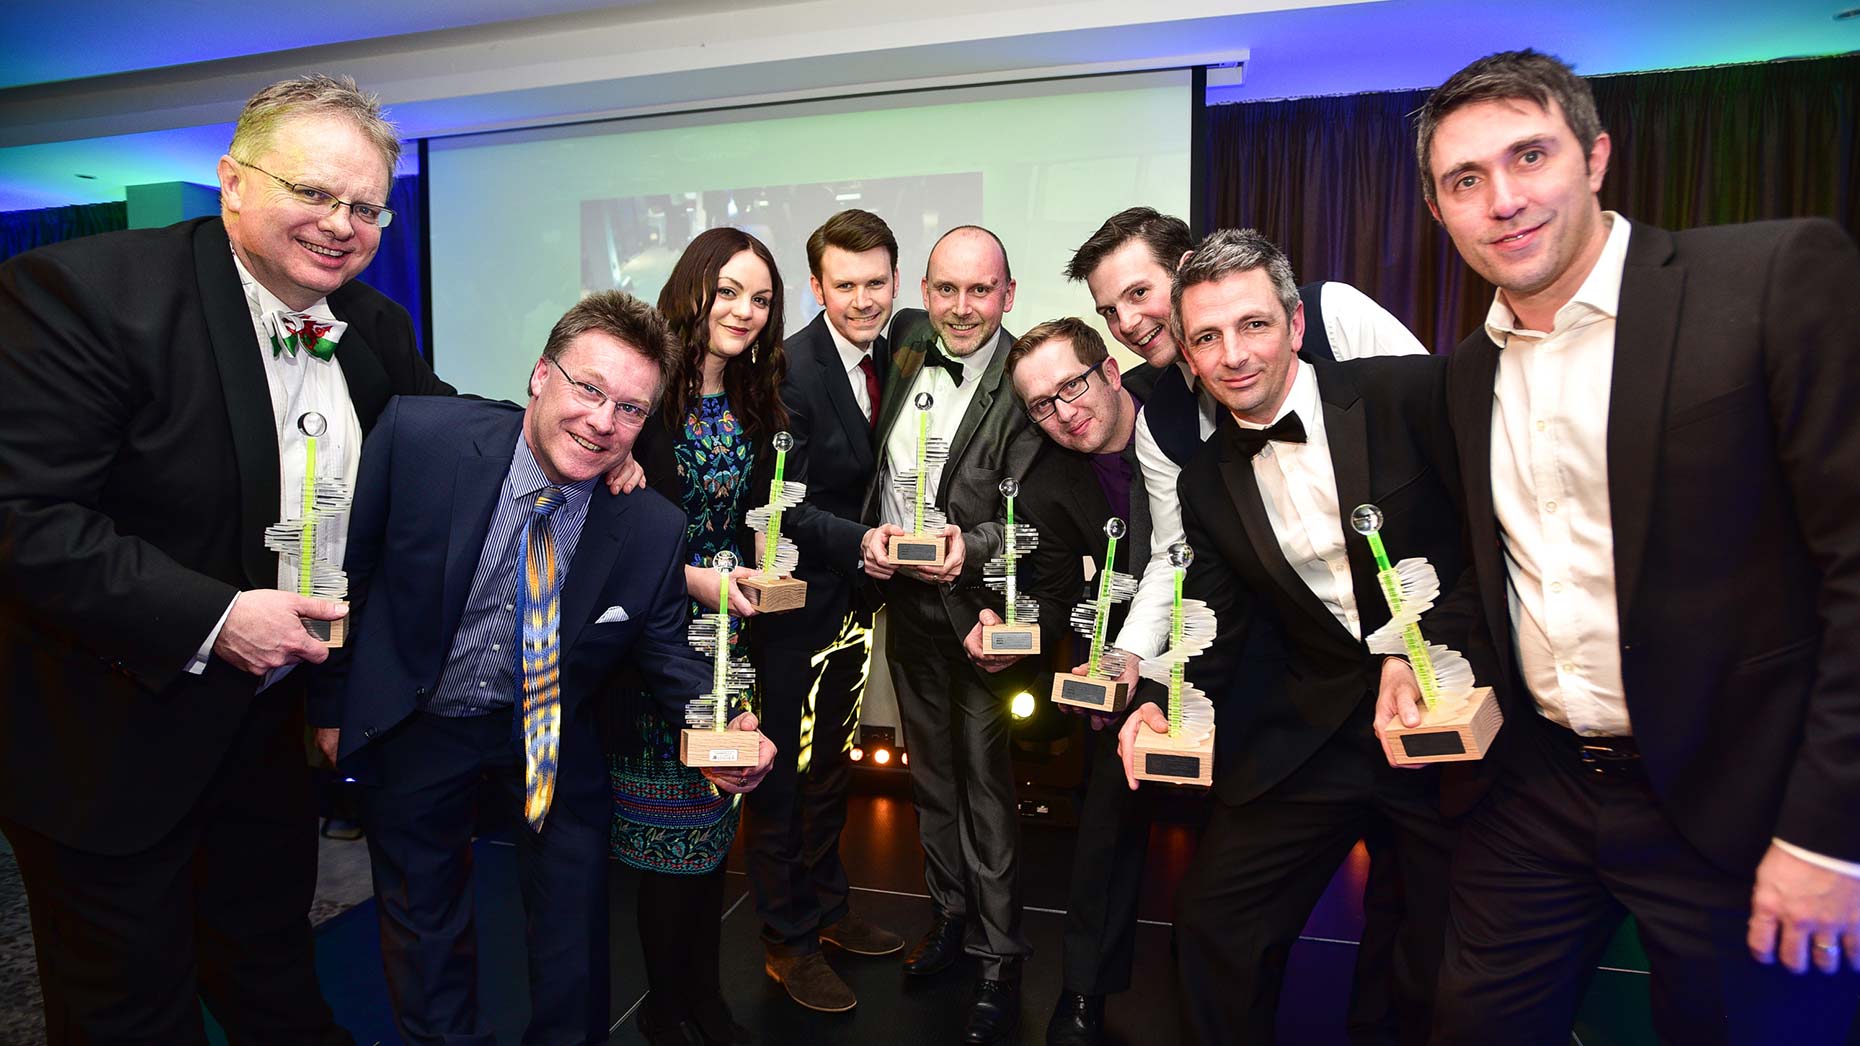 All the award winners celebrating at the first Lincolnshire Digital Awards ceremony. Photo: Steve Smailes for Lincolnshire Business